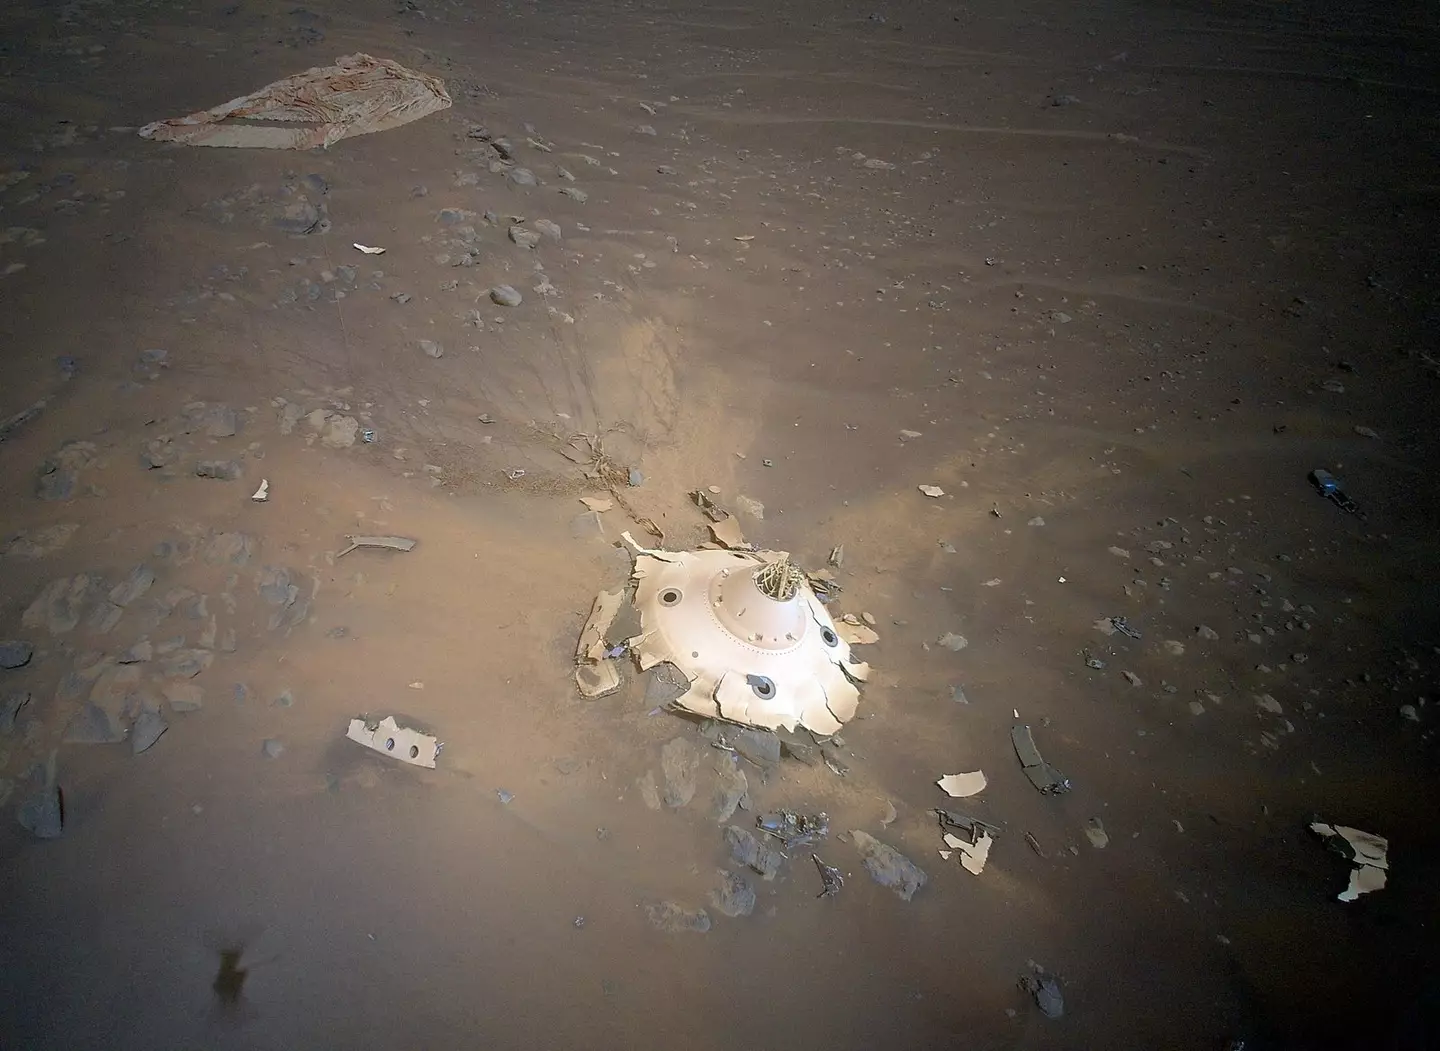 The wreckage could be informative for future missions. (NASA/JPL-Caltech)